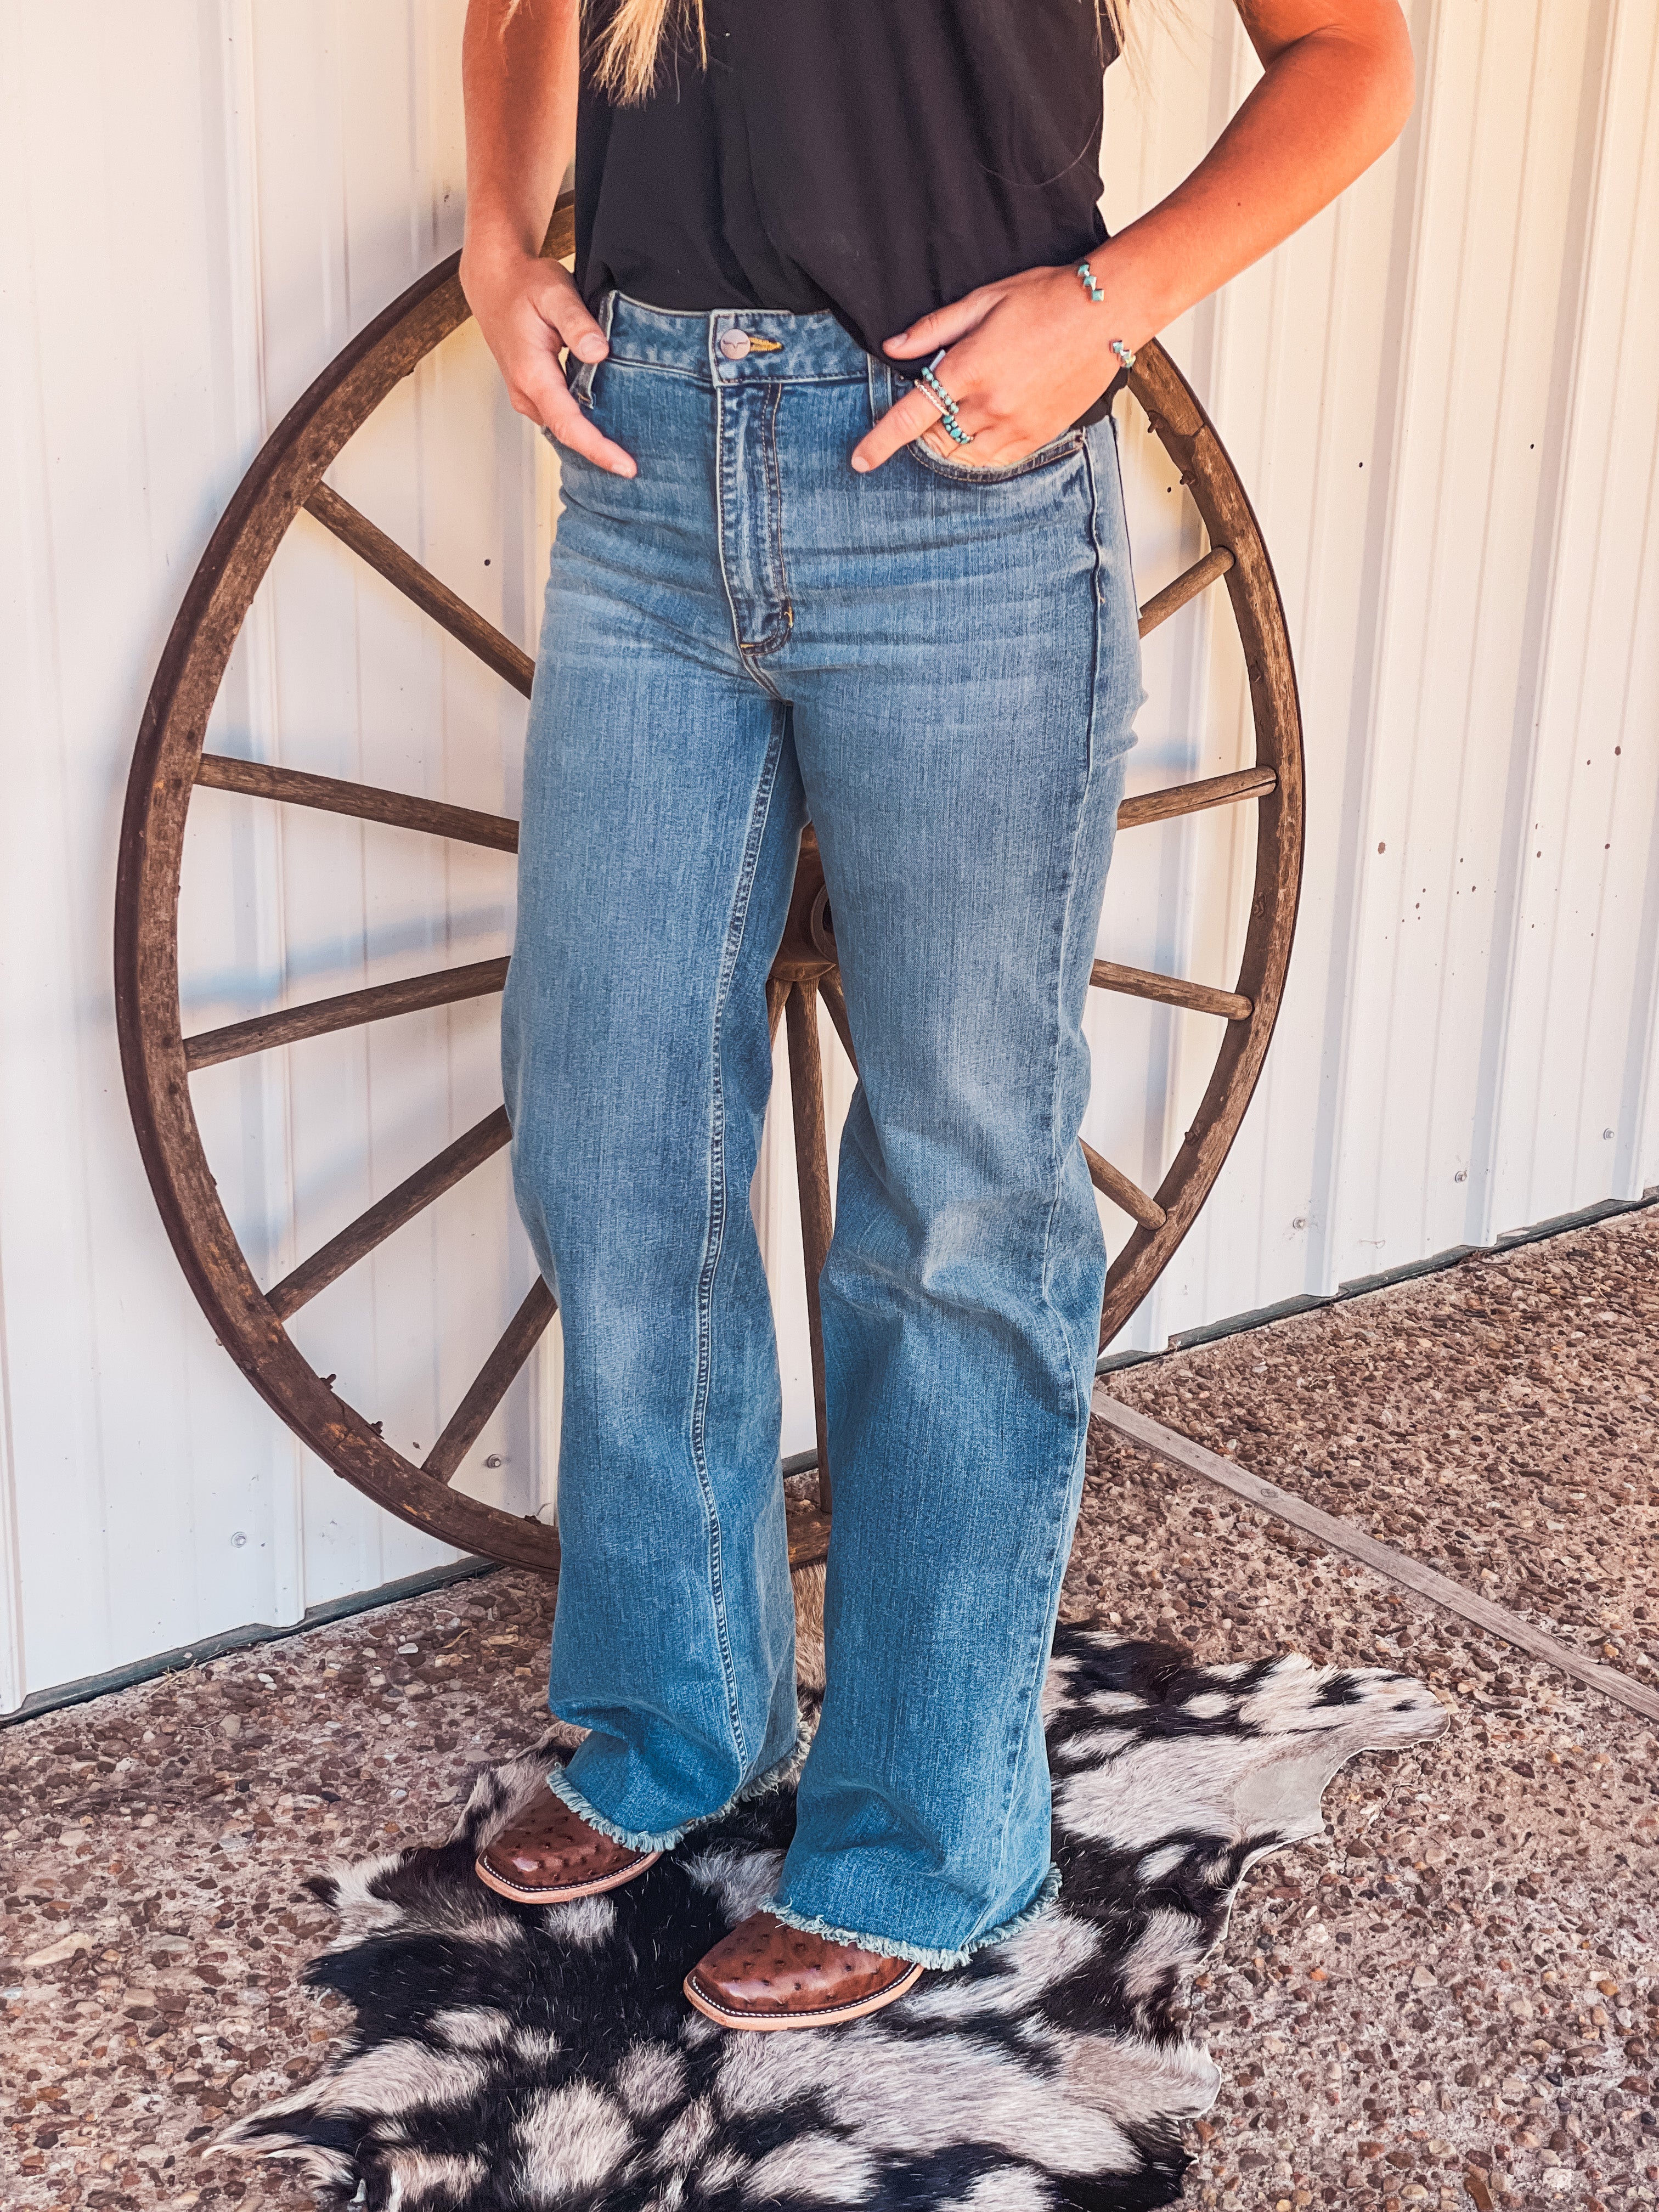 Kimes Ranch Olivia Jeans-Women's Denim-Kimes Ranch-Lucky J Boots & More, Women's, Men's, & Kids Western Store Located in Carthage, MO